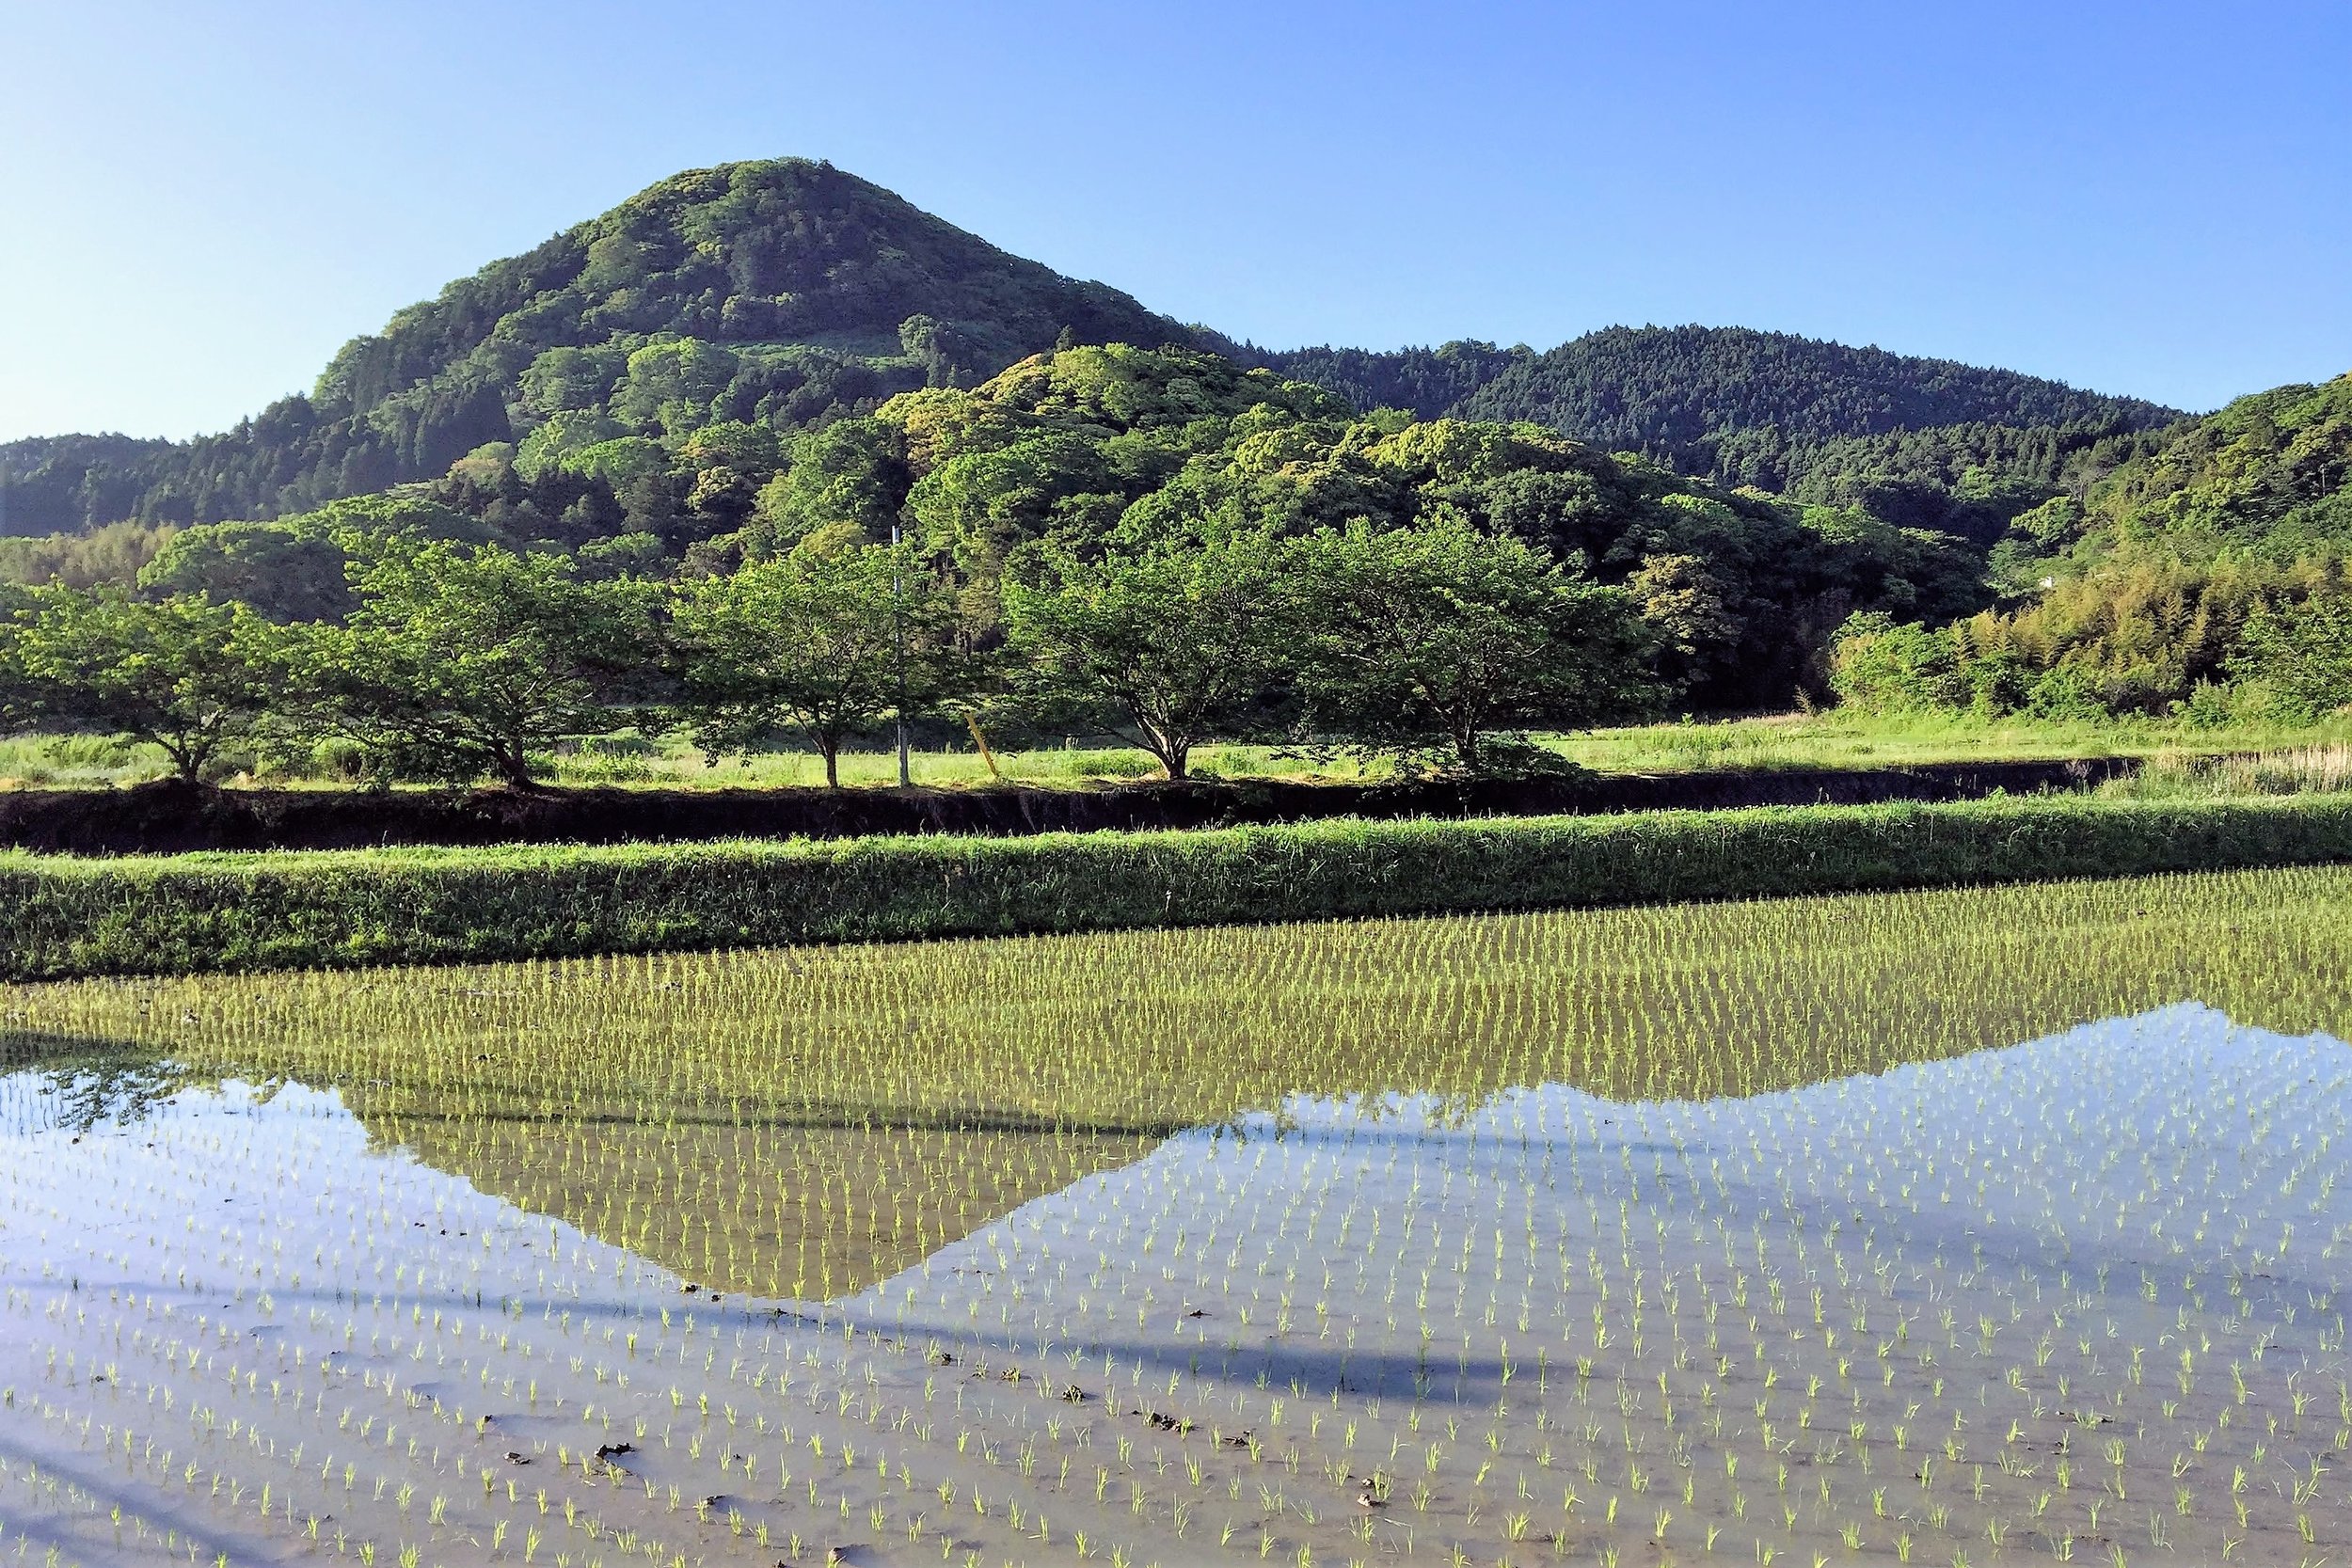 Paddy field with water, a typical scenery in late spring.jpg